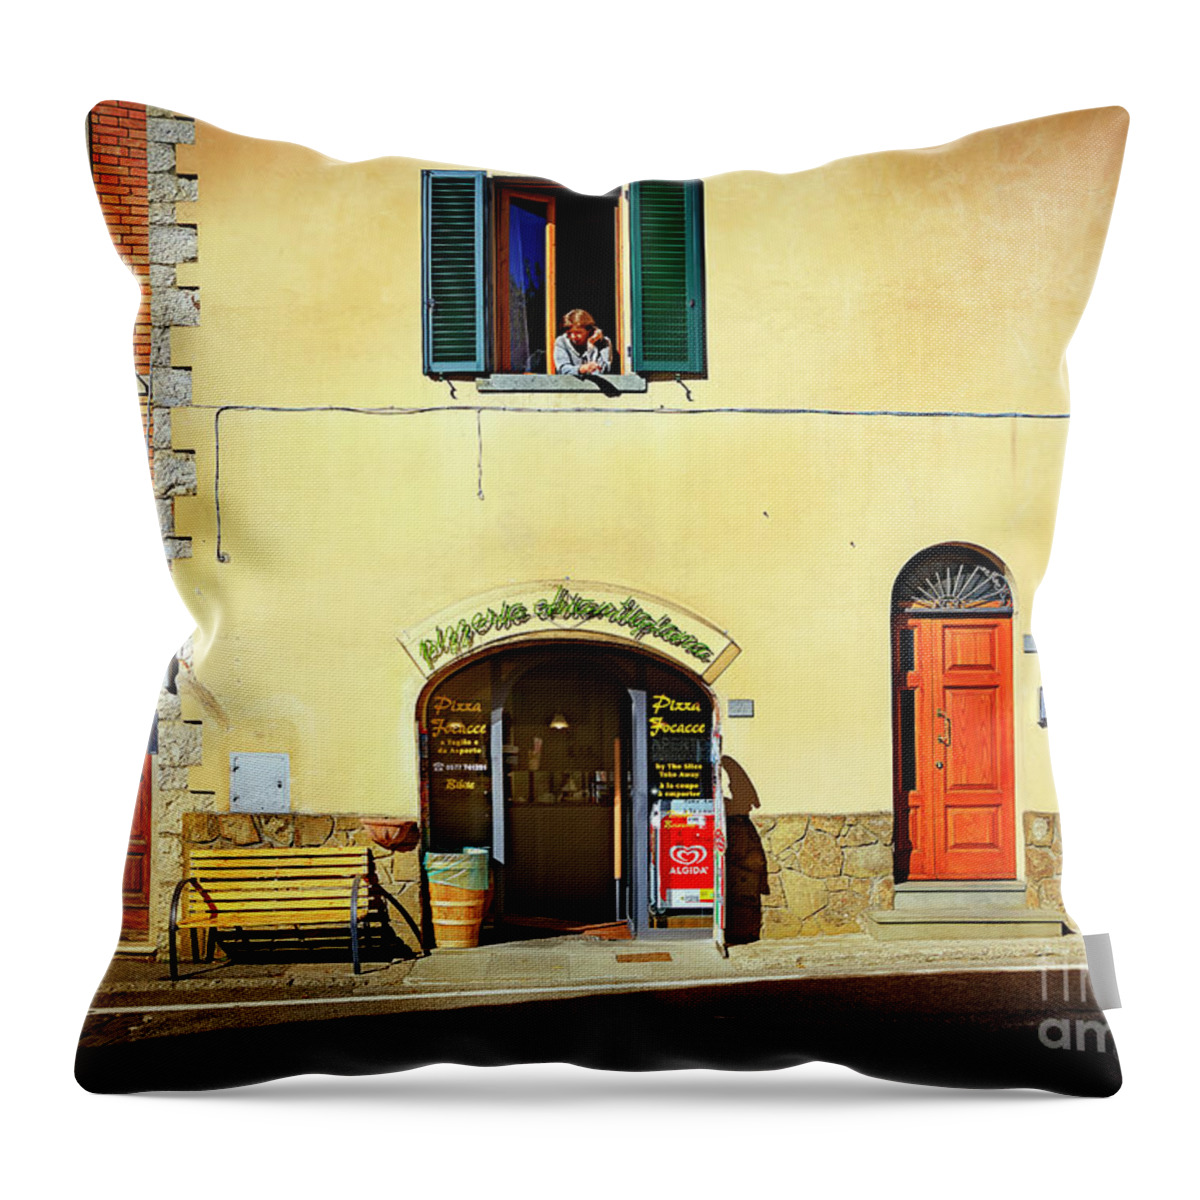 Italy Throw Pillow featuring the photograph Morning Wake Up by Craig J Satterlee